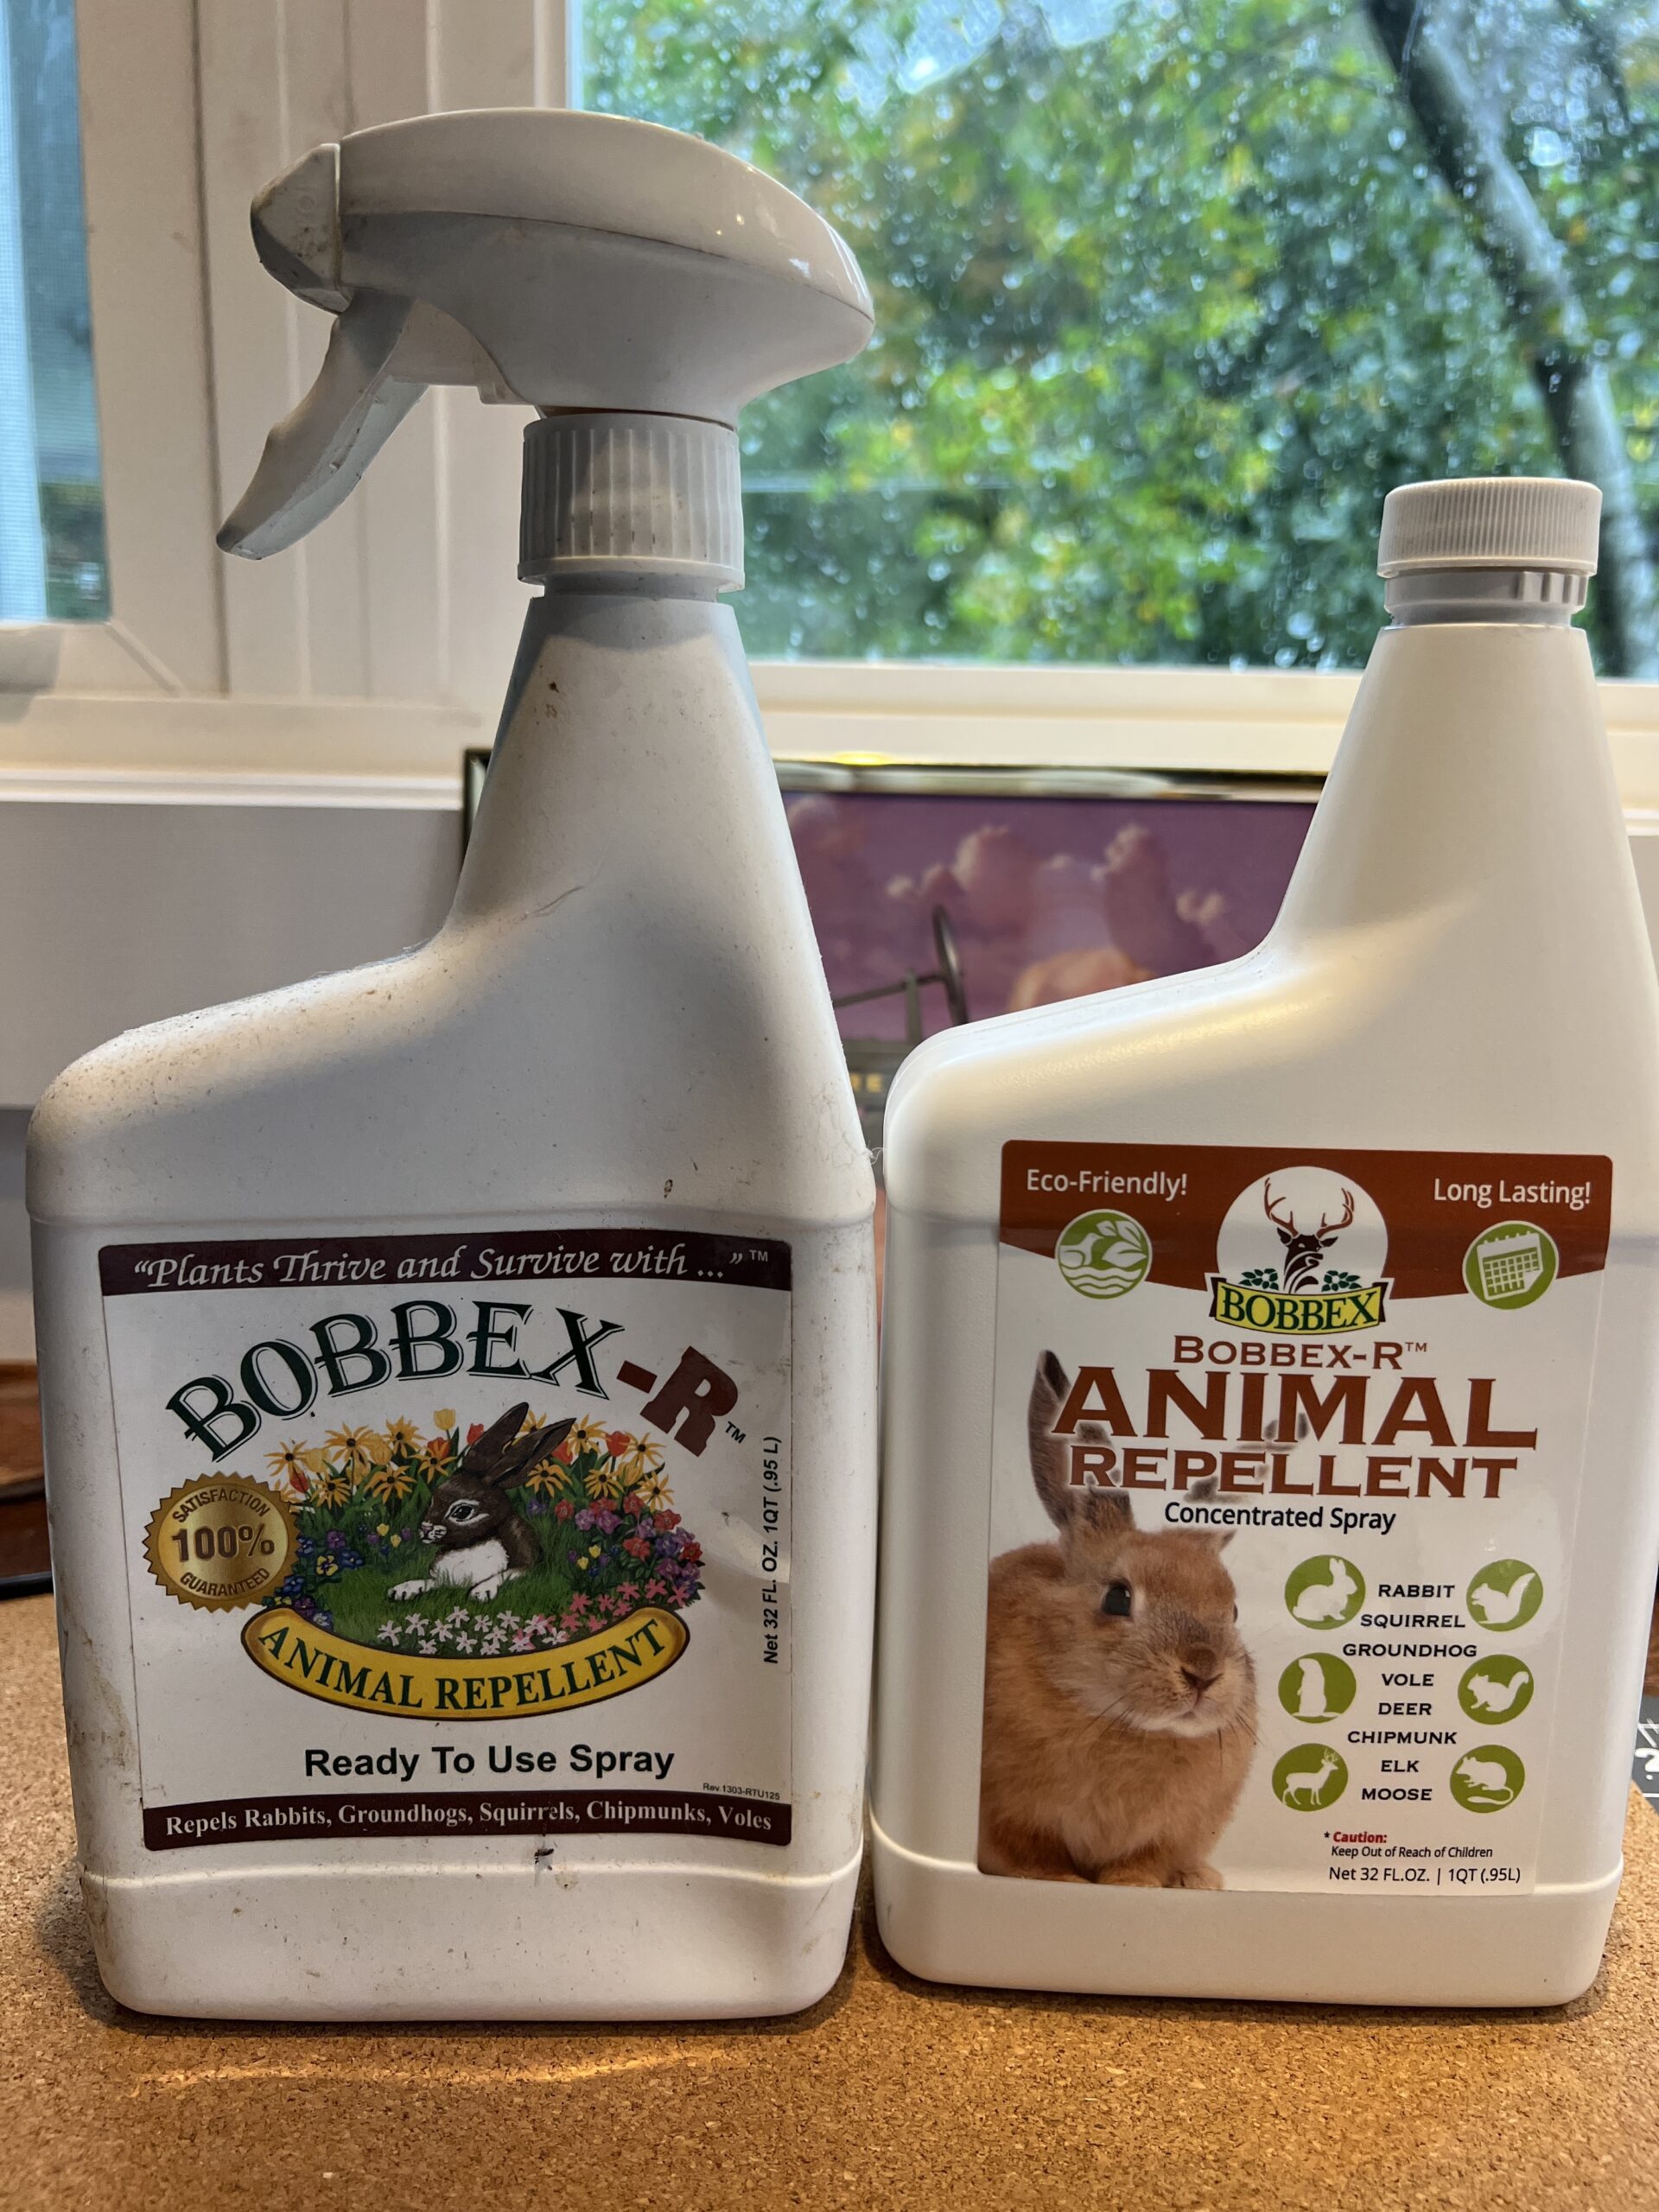 The Bobbex-R on the left is an RTU (ready to use) 32-ounce bottle. Great for spraying lily buds so chipmunks won’t eat them. A bottle of the 32-ounce concentrate on the left, which is good for bulb dips. If you can’t find it a local garden centers it’s available online. ANDREW MESSINGER